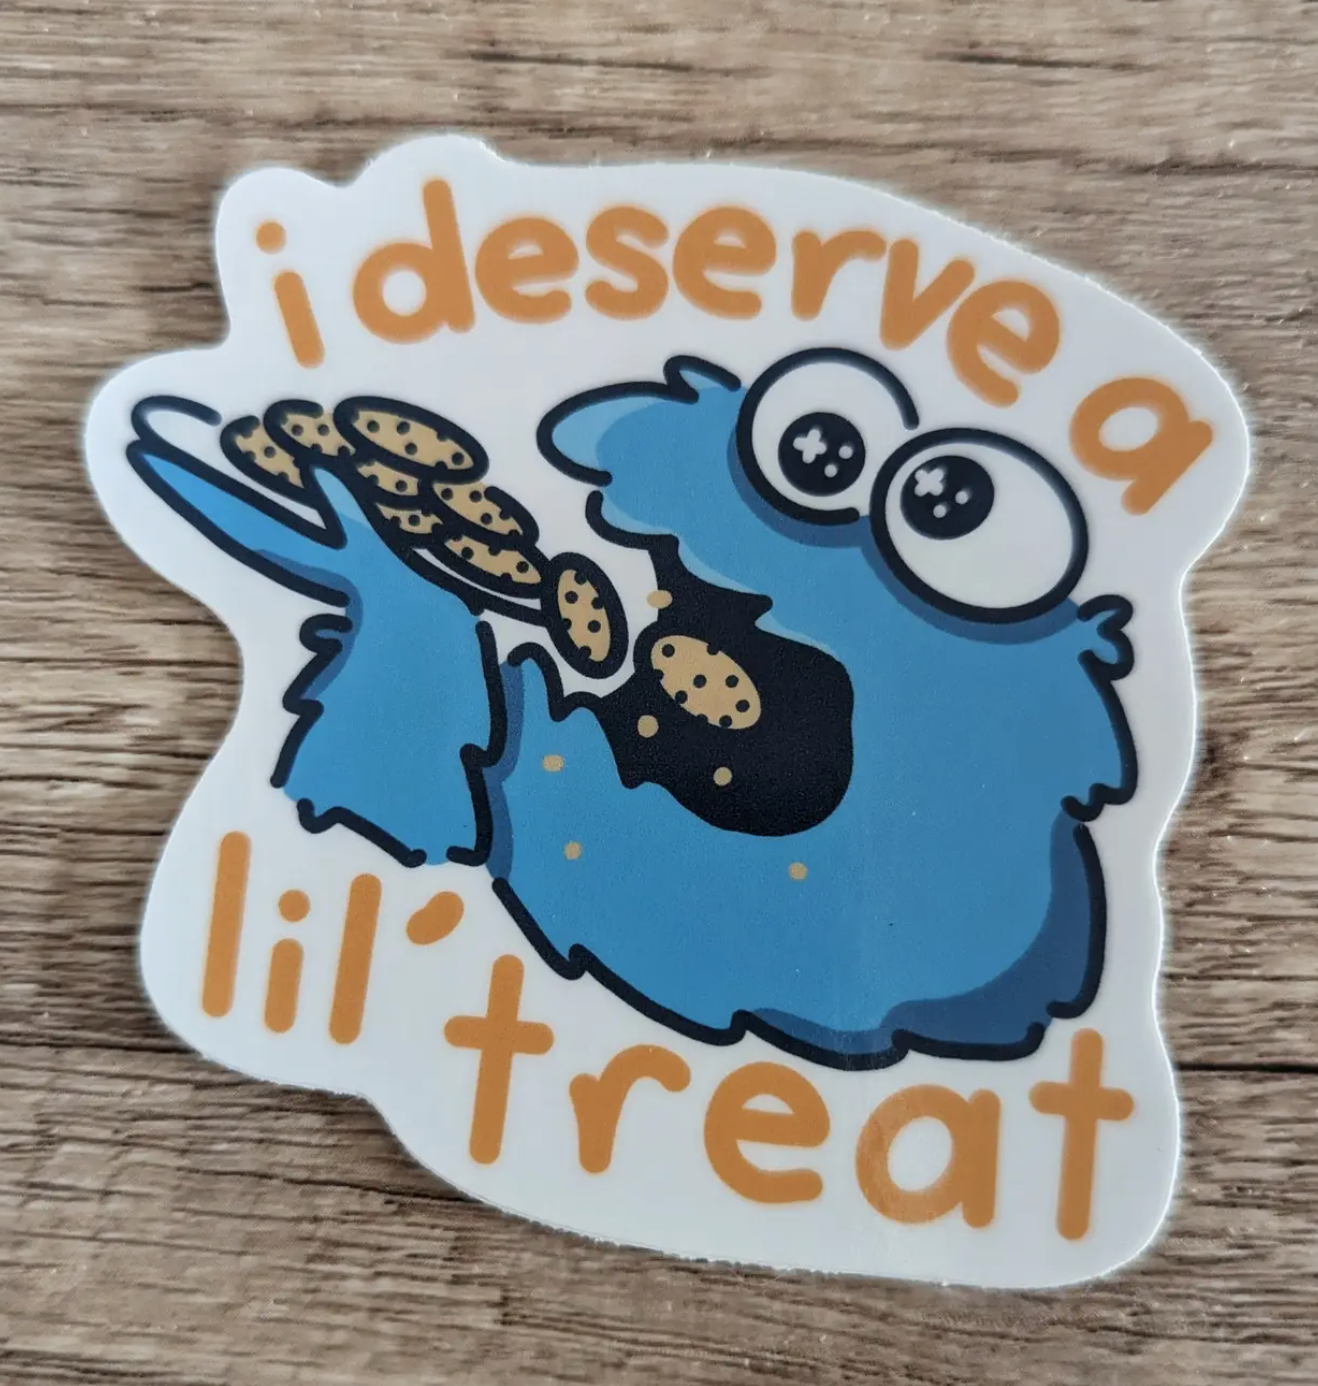 Load image into Gallery viewer, I Deserve A Little Treat Cookie Monster Sticker
